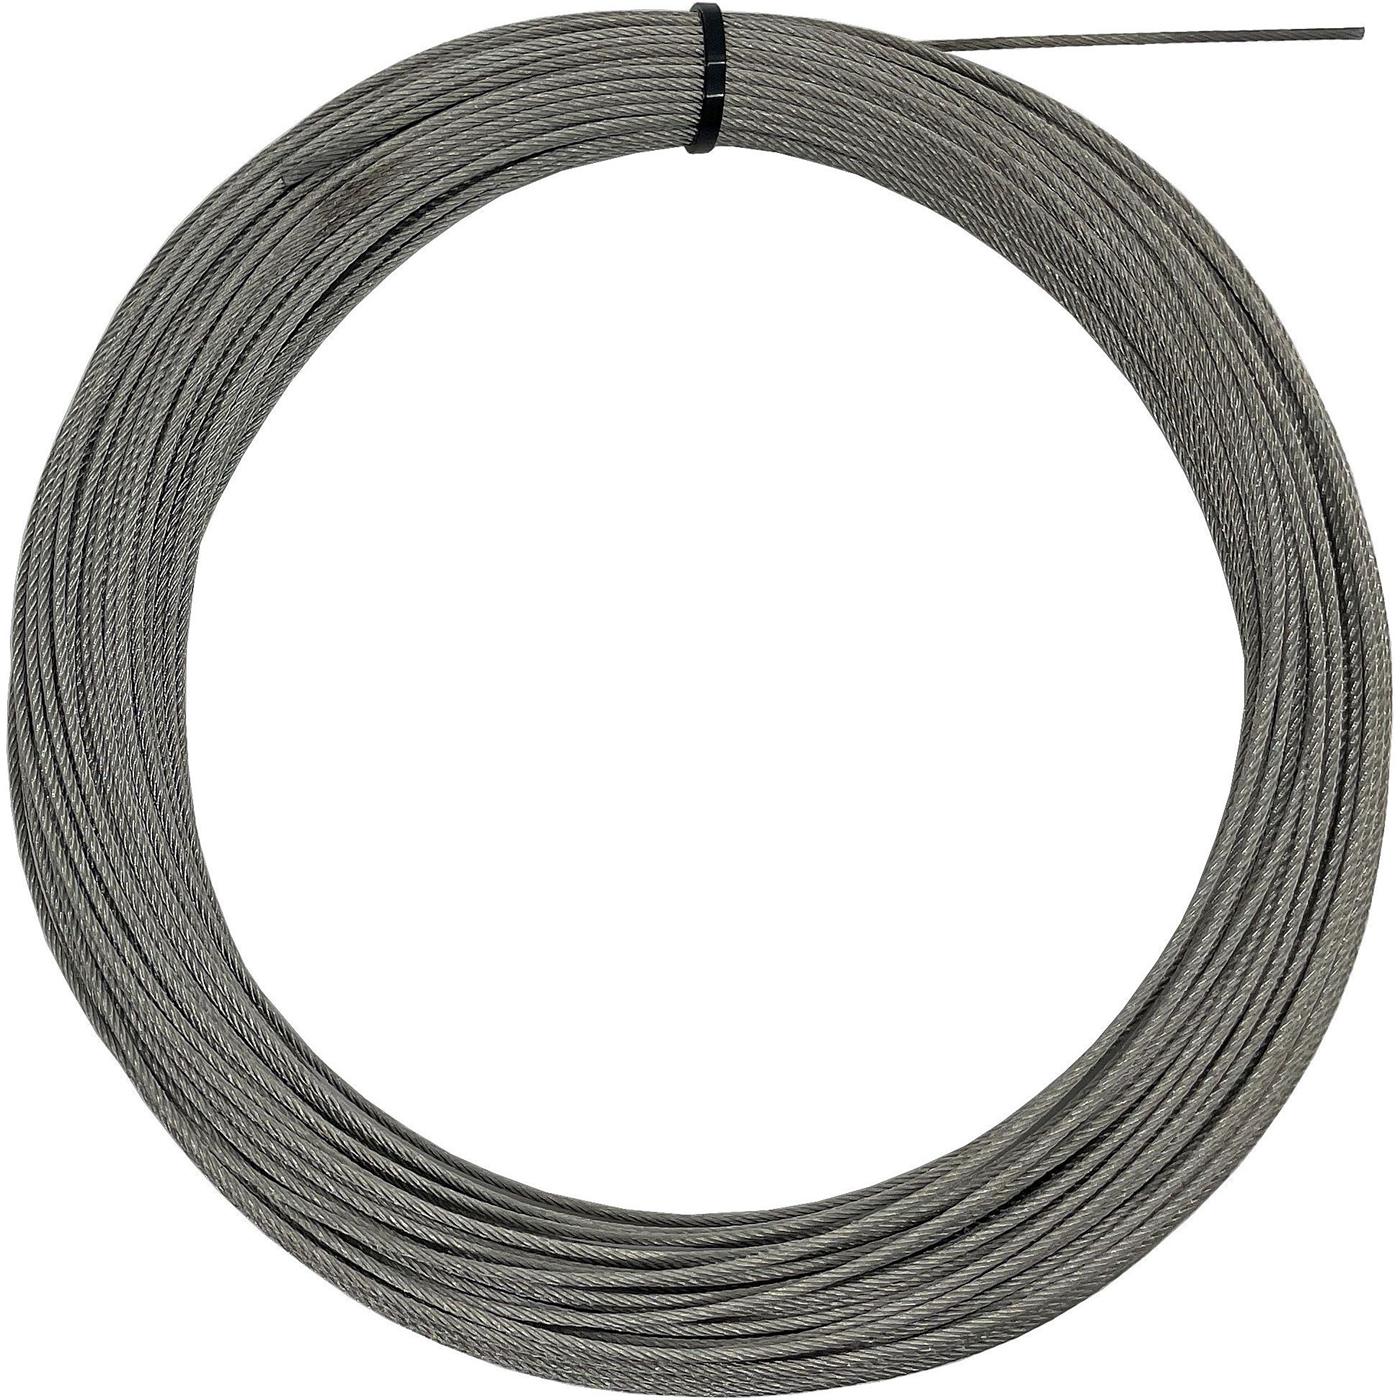 Wire rope 100m Stainless steel V4A 316 2mm 7x19 Ropes stainless for trellis systems